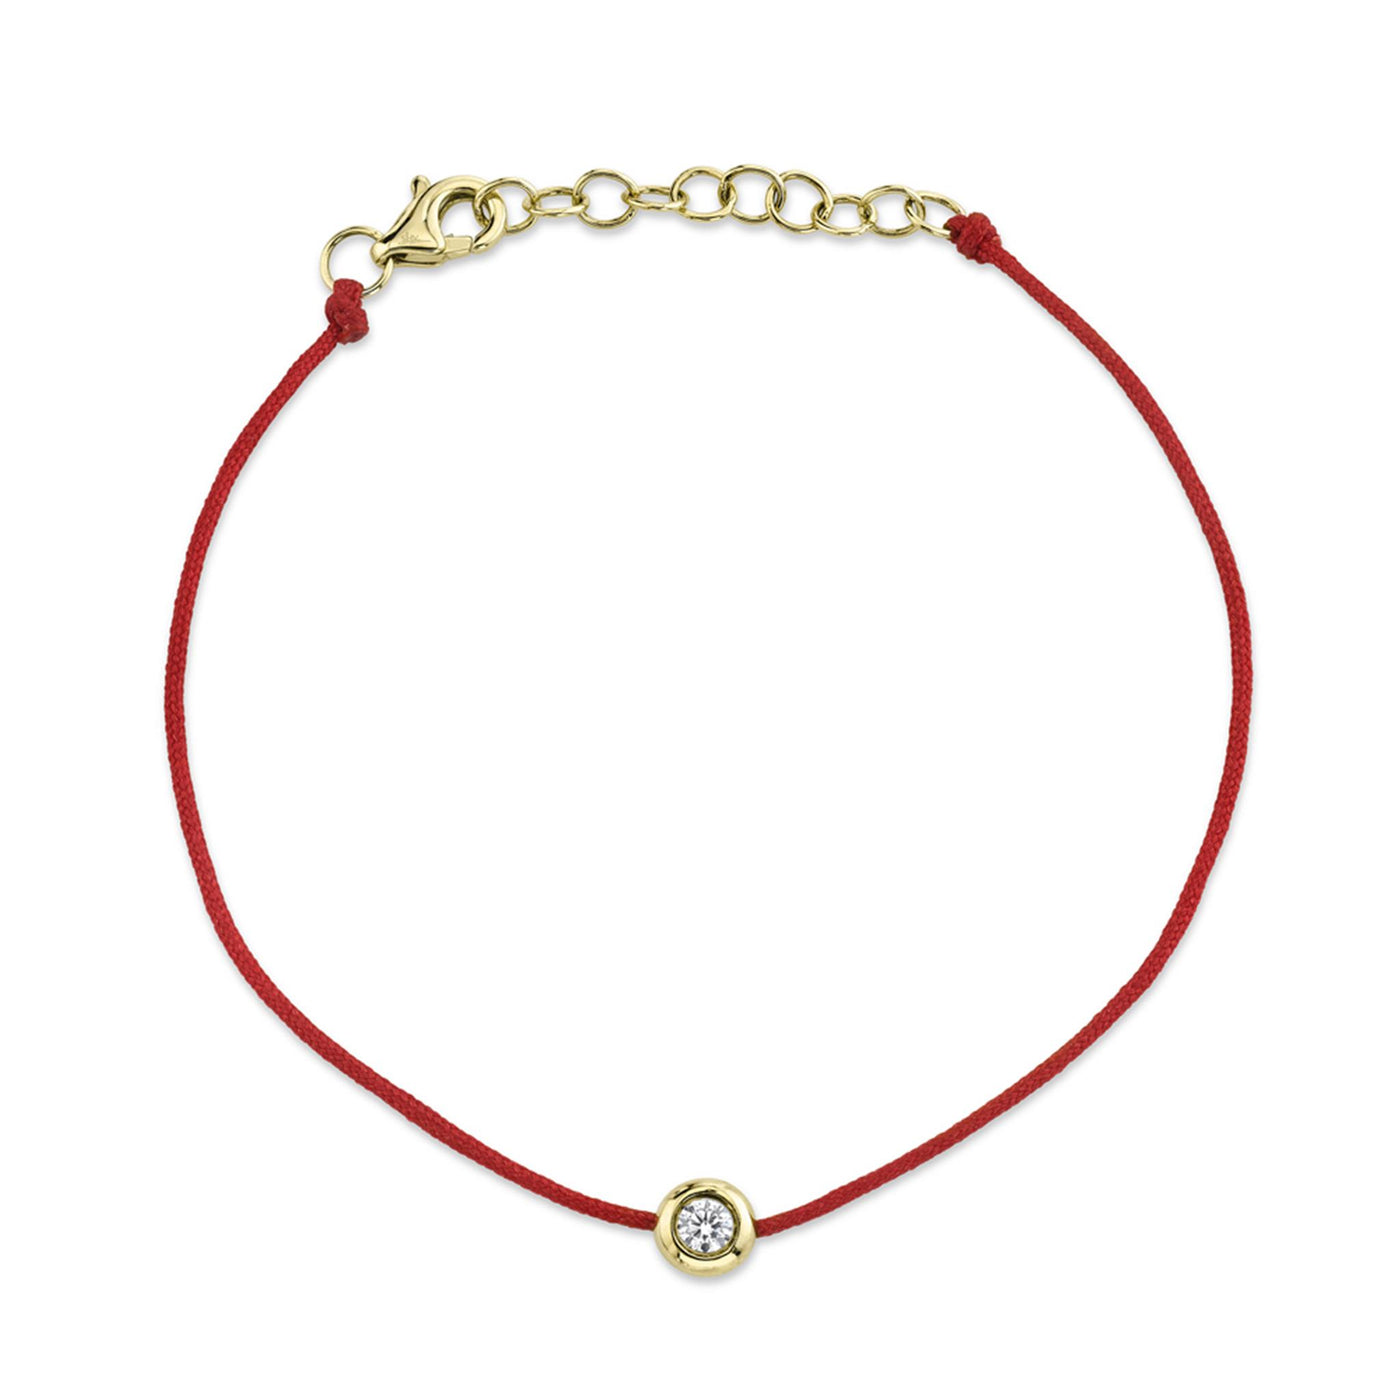 Shy Creation 14K Yellow Gold 0.09ctw 6.75" Station On A Red Silk String Style Diamond Bracelet